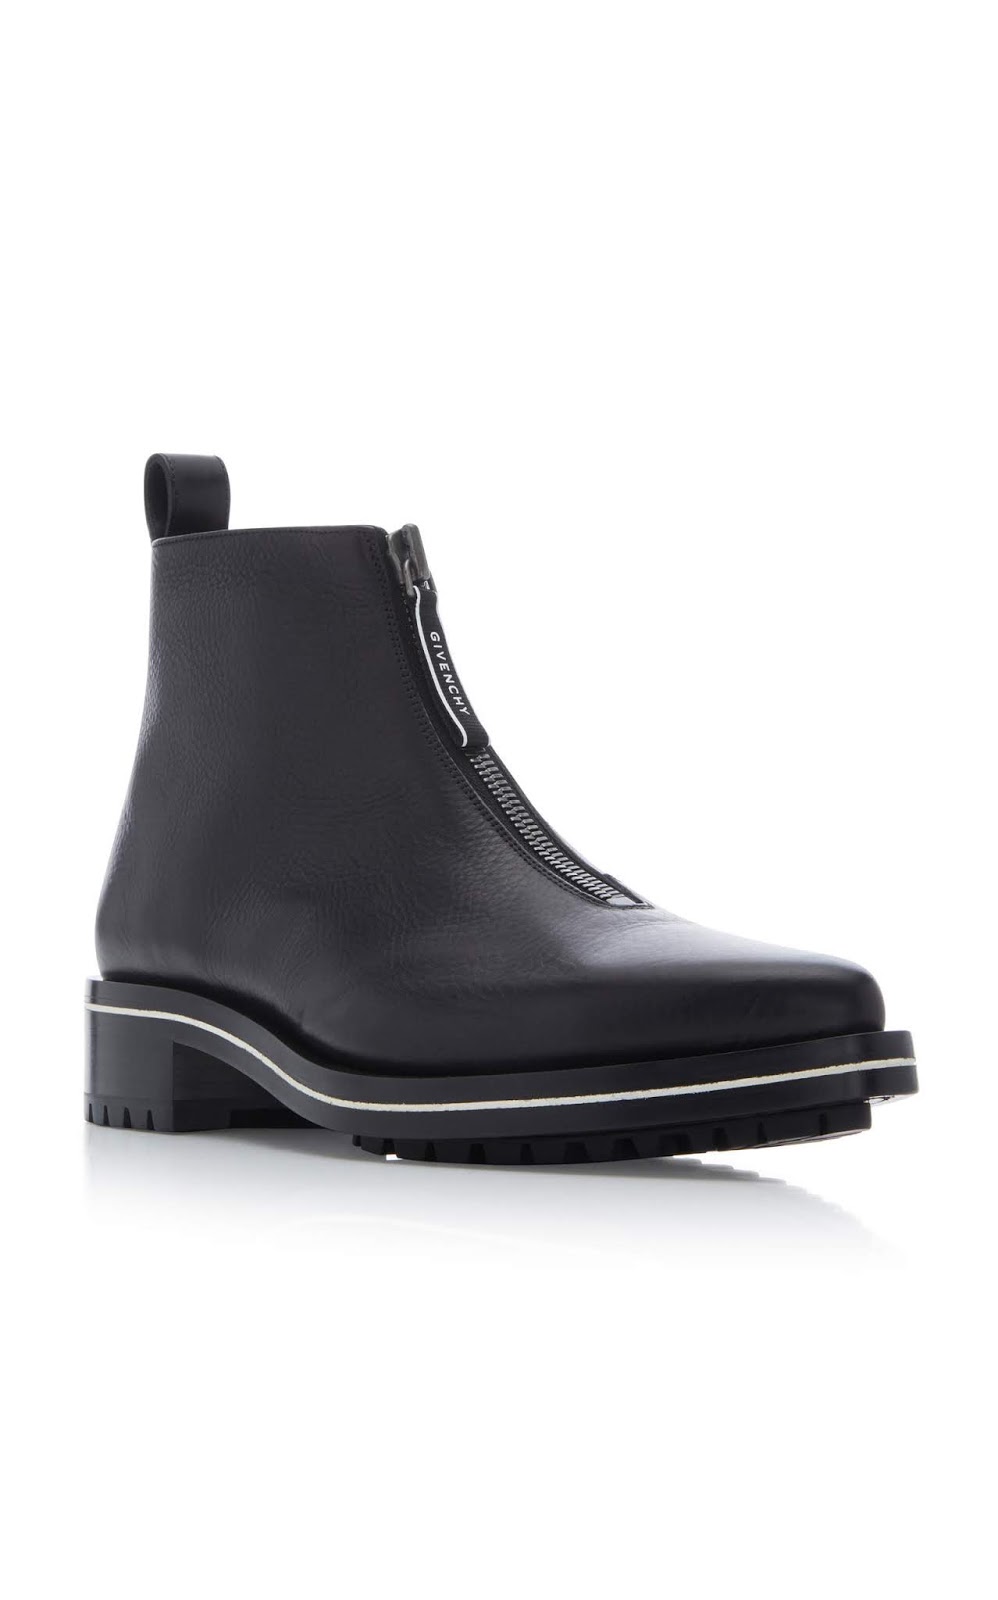 Zipped And Ready: Givenchy Richmond Zip Calfskin Chelsea Boots ...